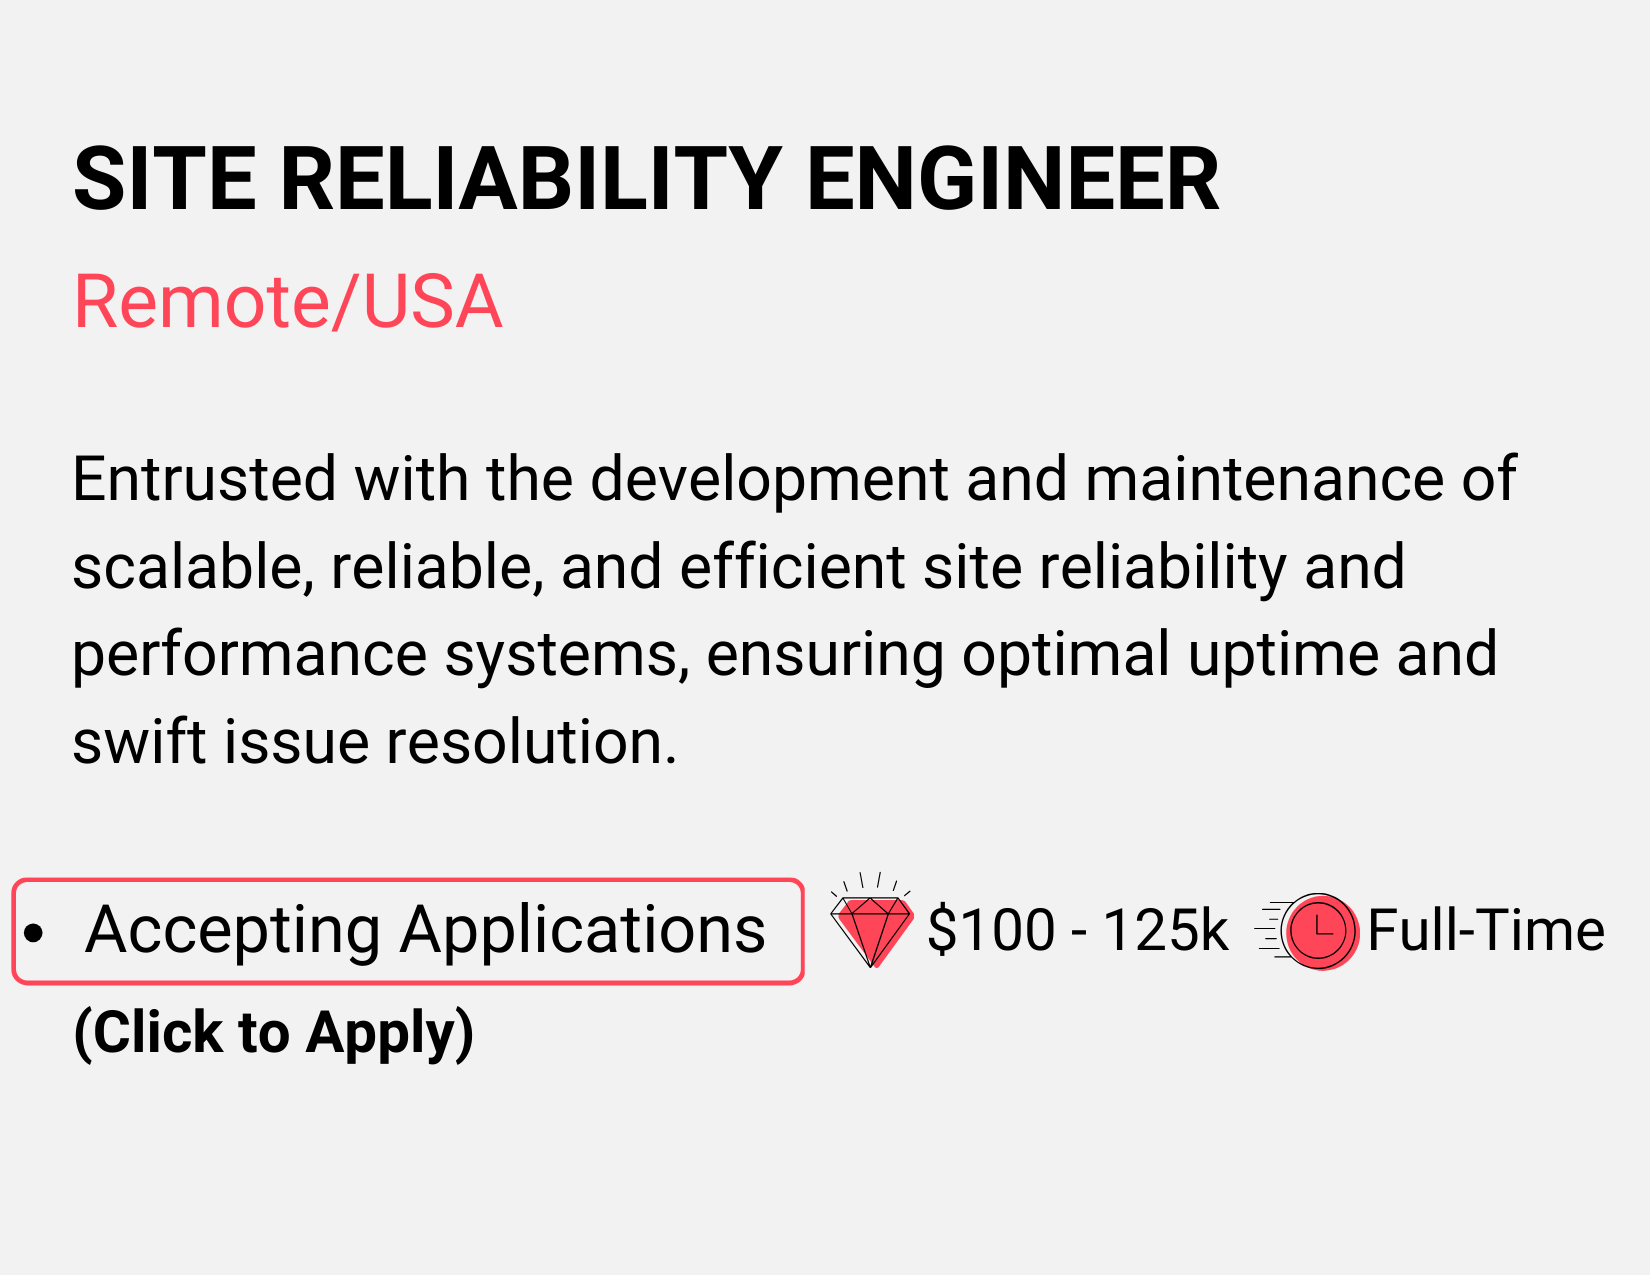 Site Reliability Engineer